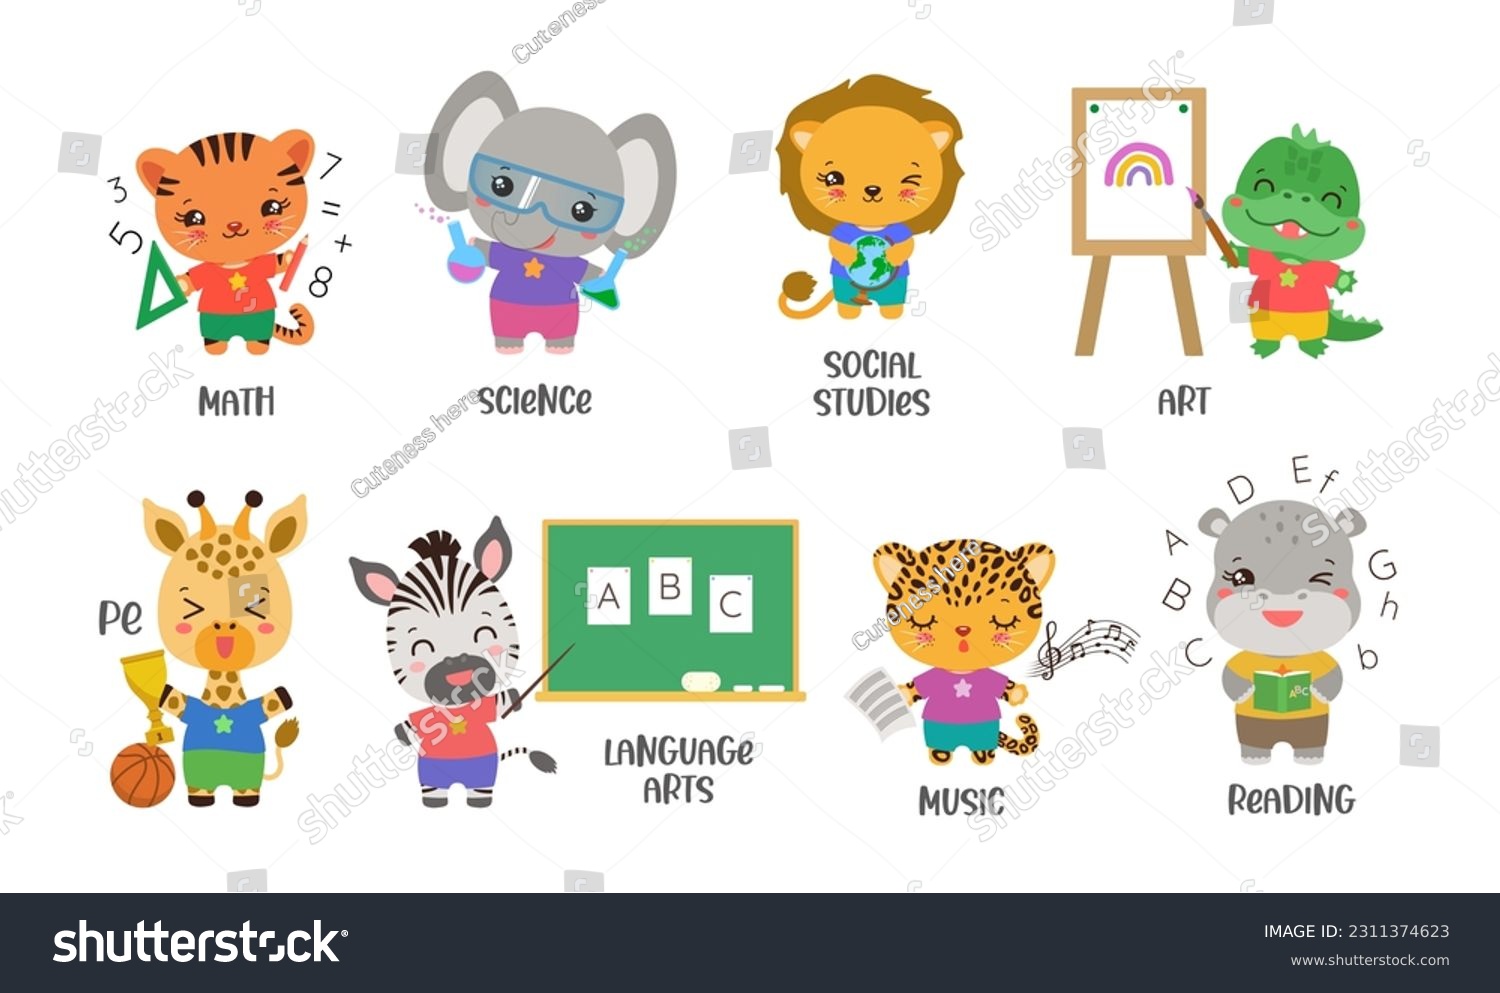 SVG of School subject icons with cute safari animals. Back to school kawaii animal set. Cartoon graphics for educational projects. Fun study elementary subjects. svg